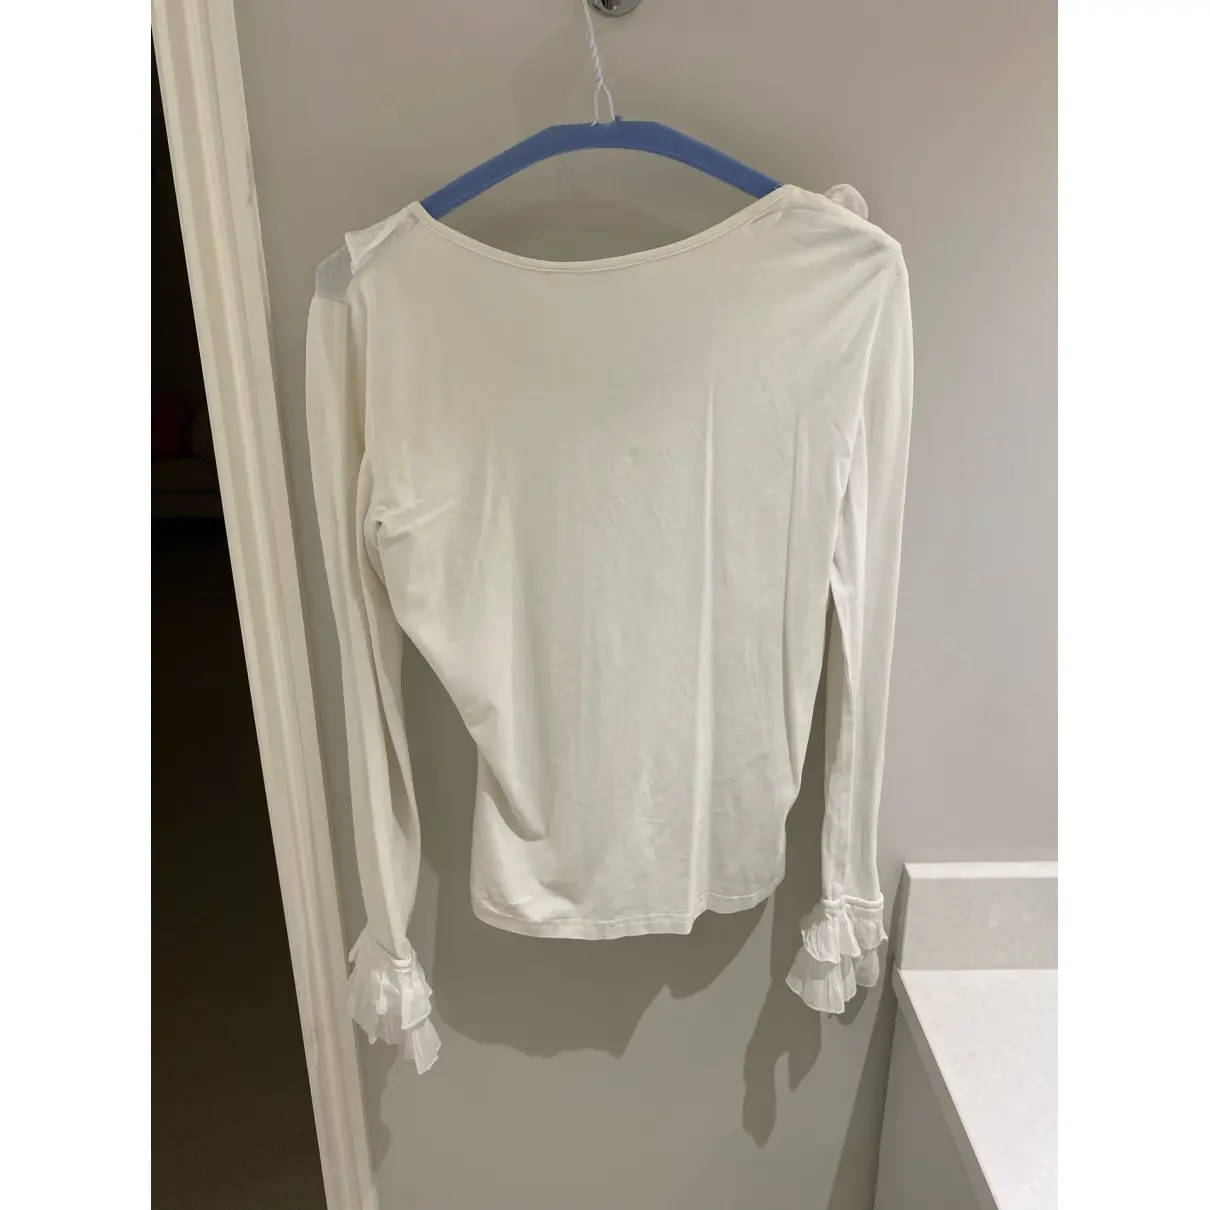 Buy Anne Fontaine Blouse online